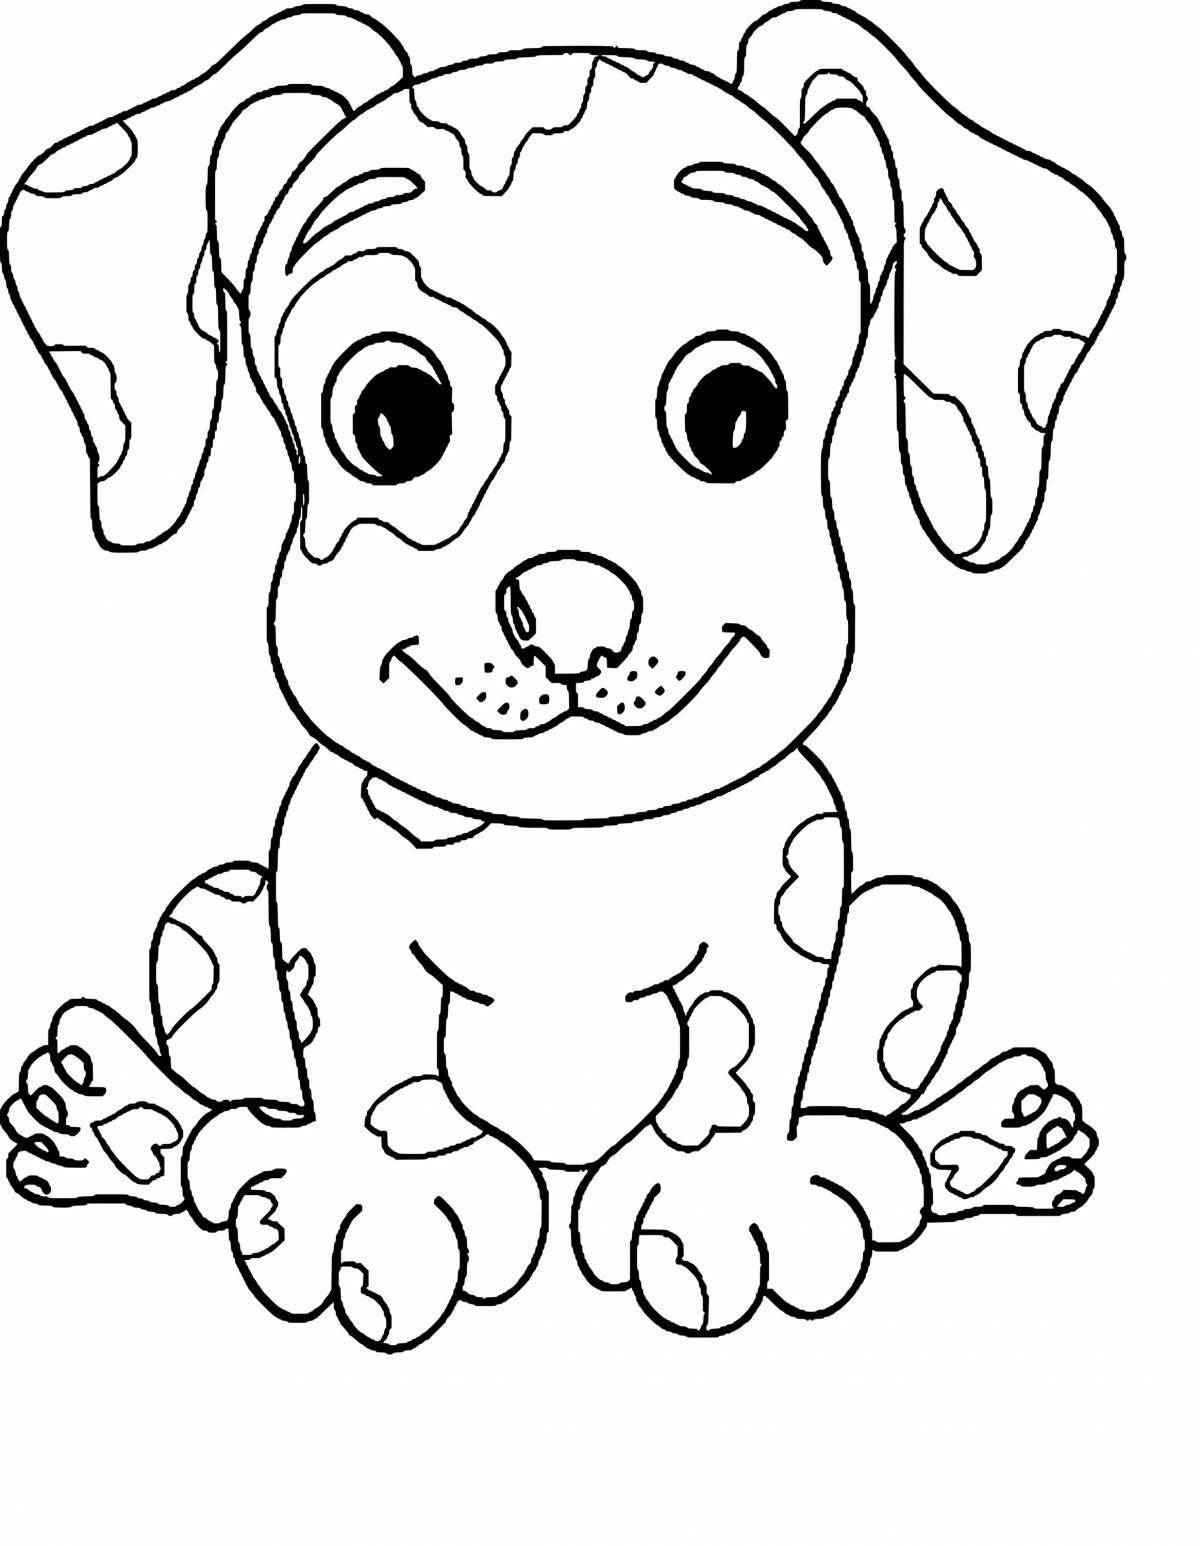 Snuggly cute puppy coloring page